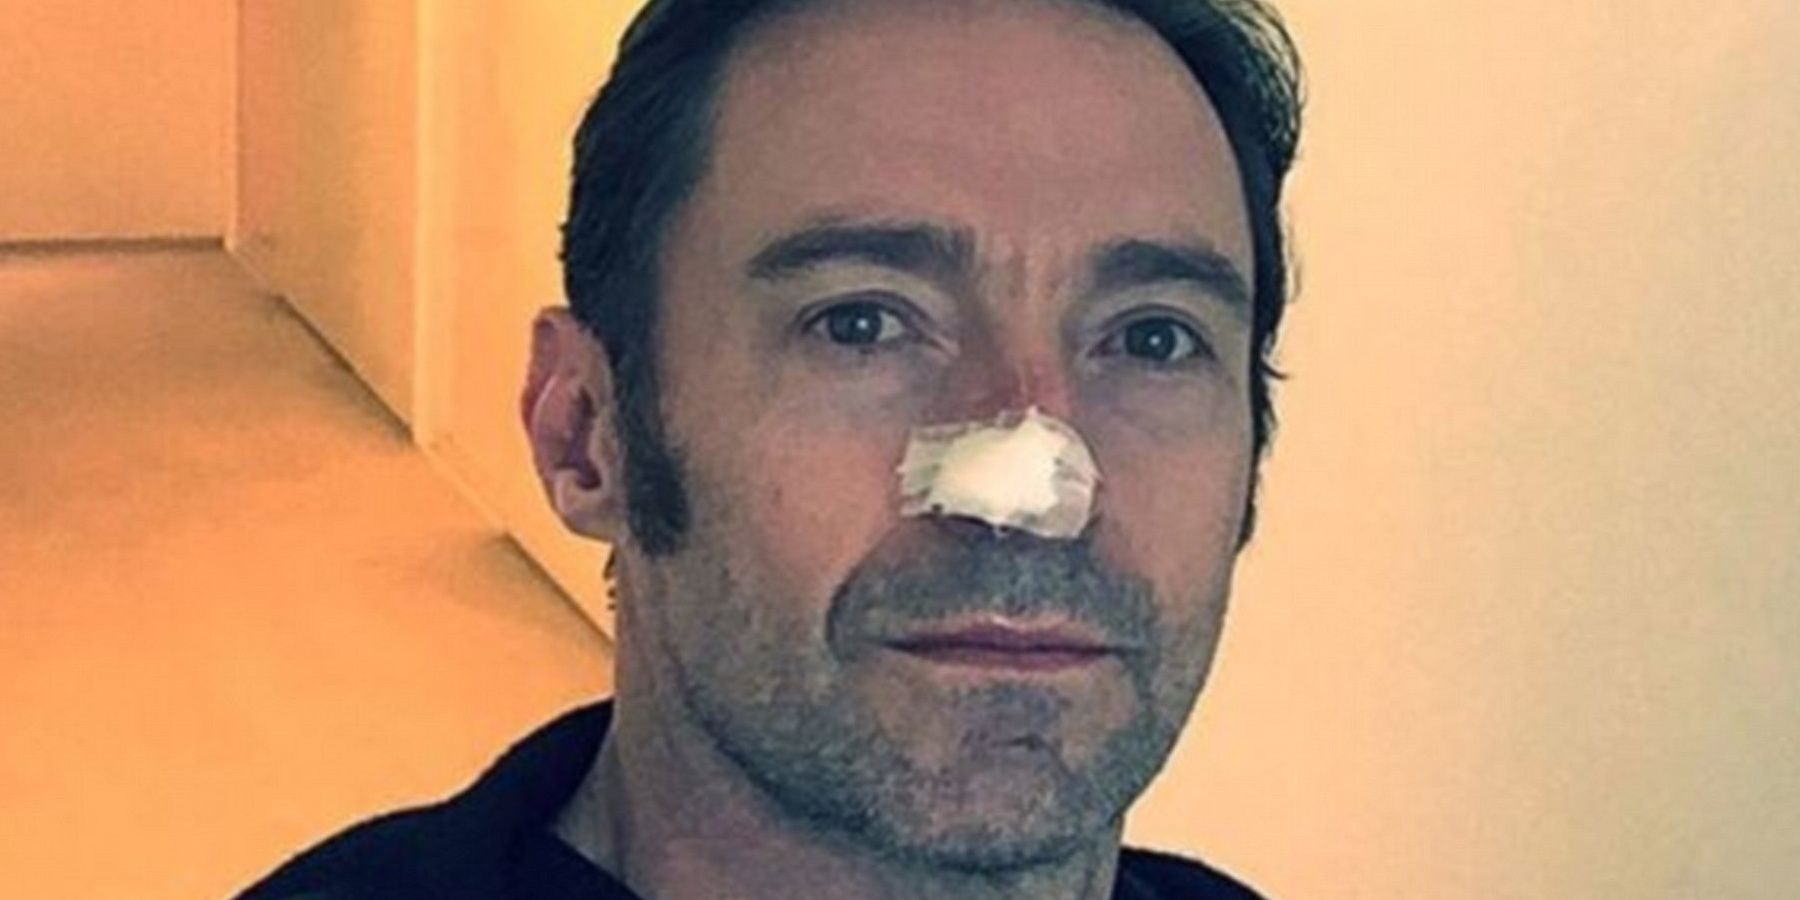 Hugh Jackman with a stitched nose, post-surgery 